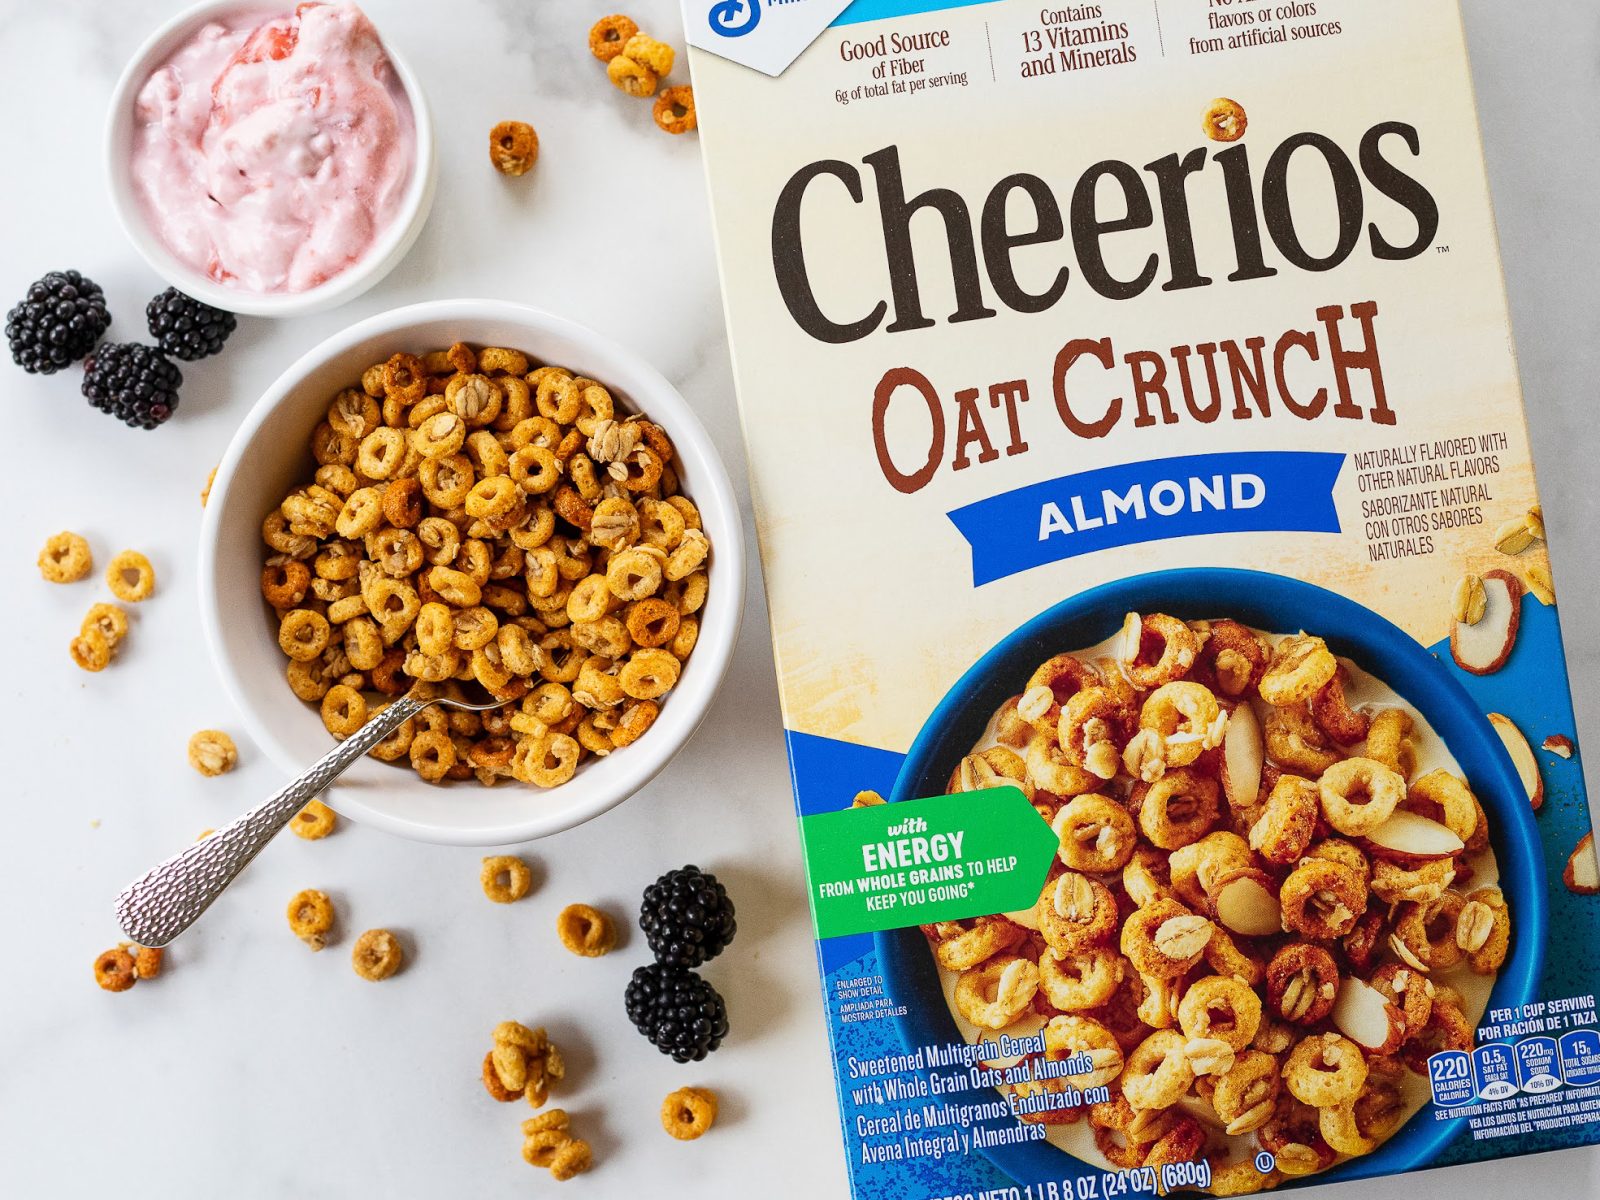 Get Large Size Boxes Of Cheerios As Low As $1.24 At Kroger (Regular Price $5.99)